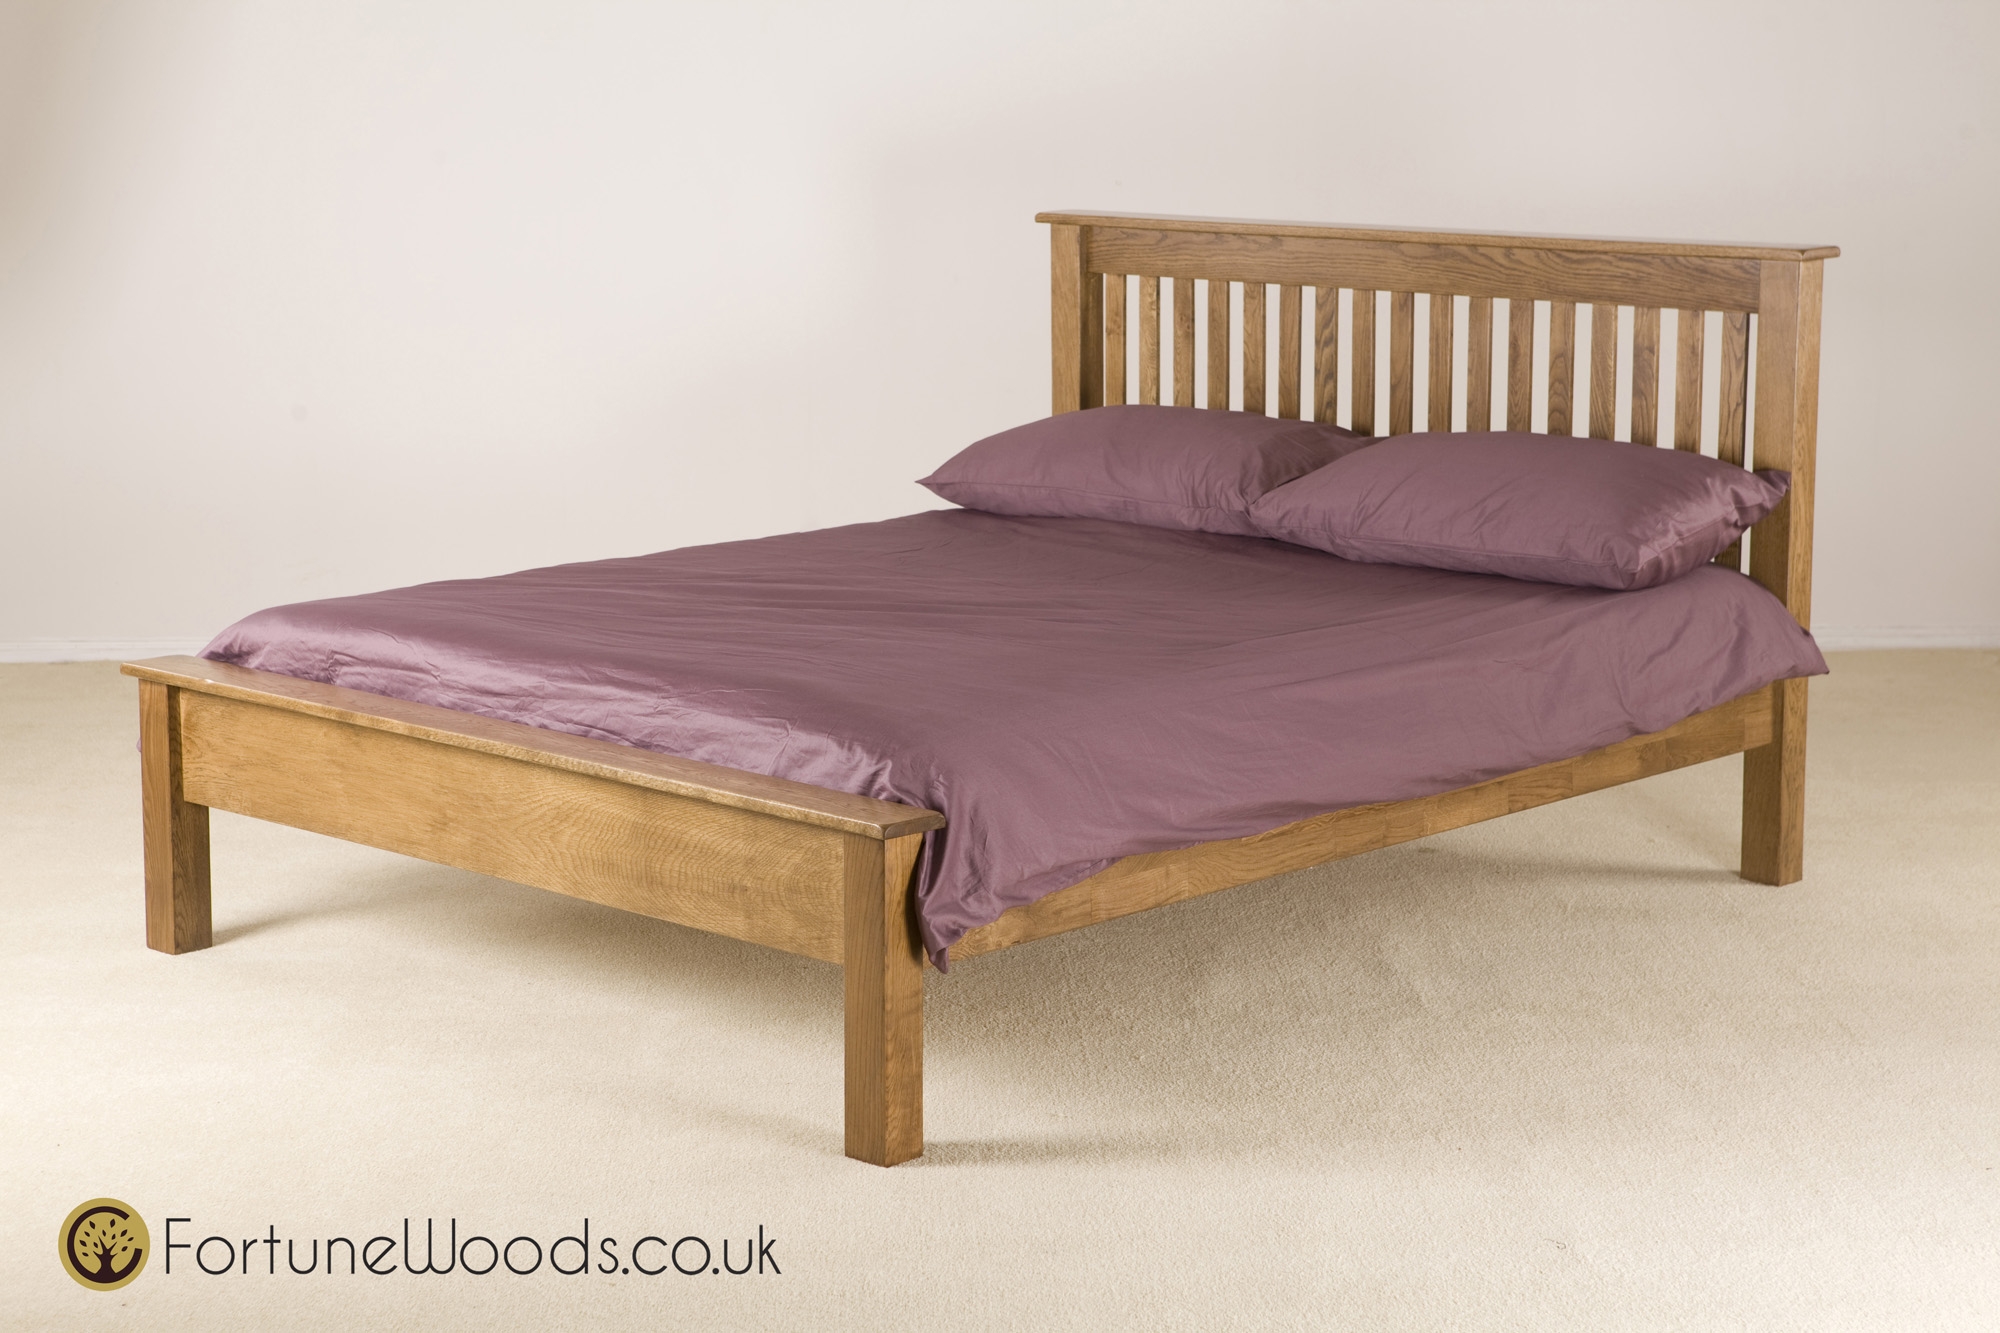 Fortune Woods Rustic Bed Single